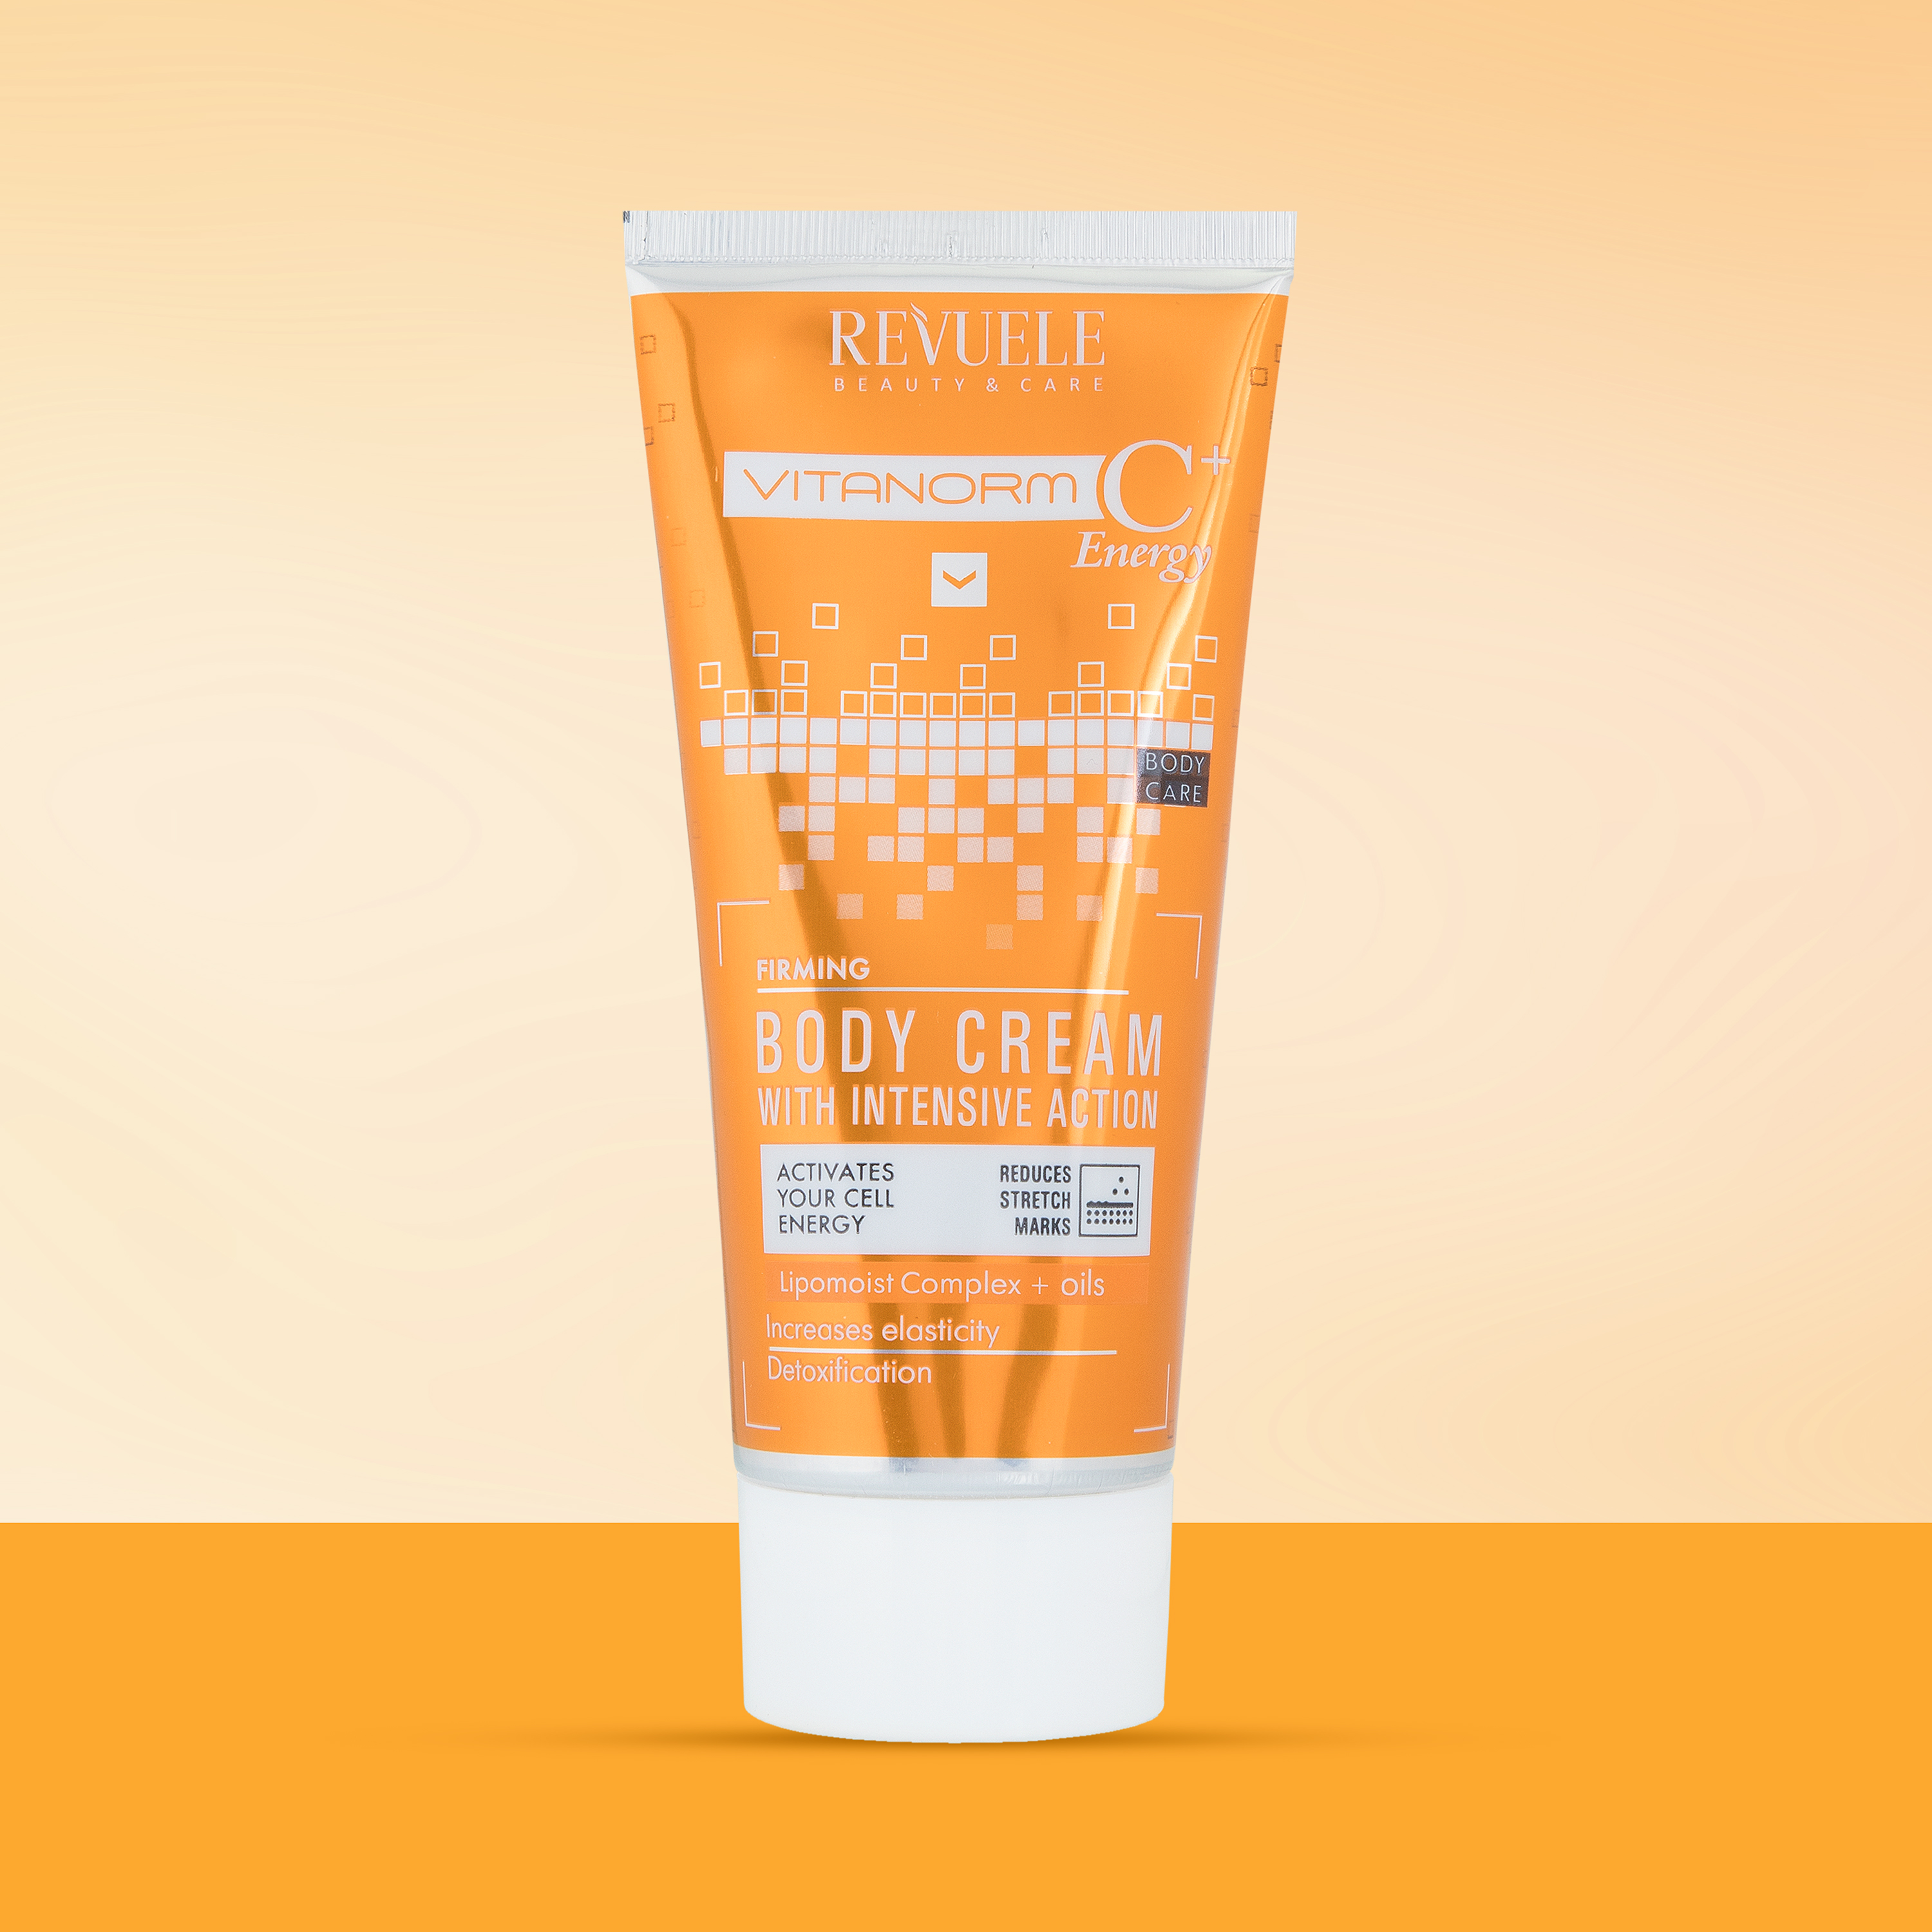 Revuele Vitamin C Firming Body Cream With Intensive Action - Reduces Stretch Marks